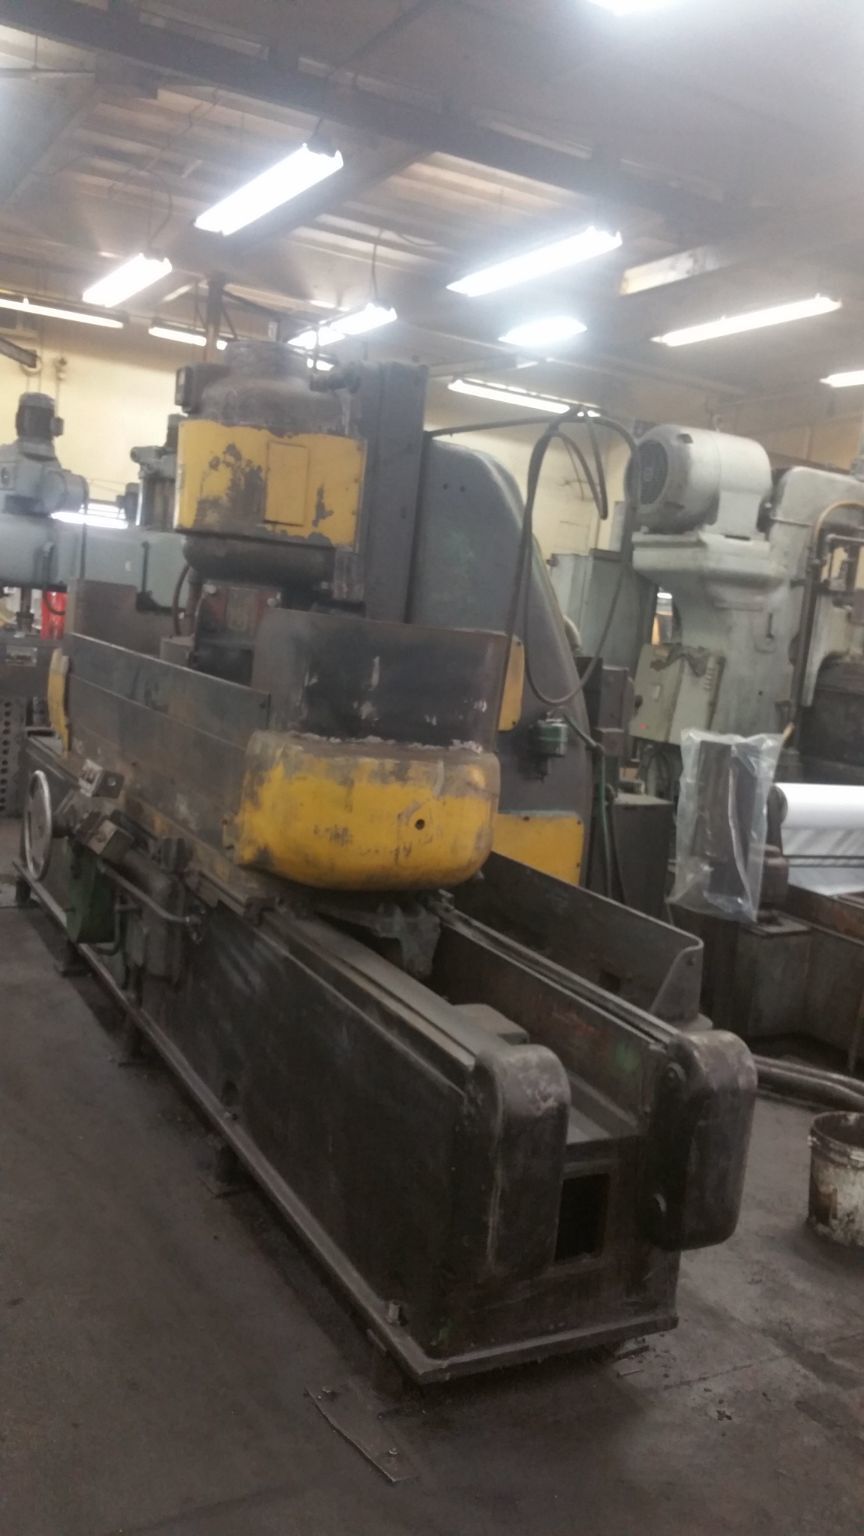 HANCHETT MANUFACTURING CO. TYPE 300, SIZE 60 Sold Equipment | MD Equipment Services LLC